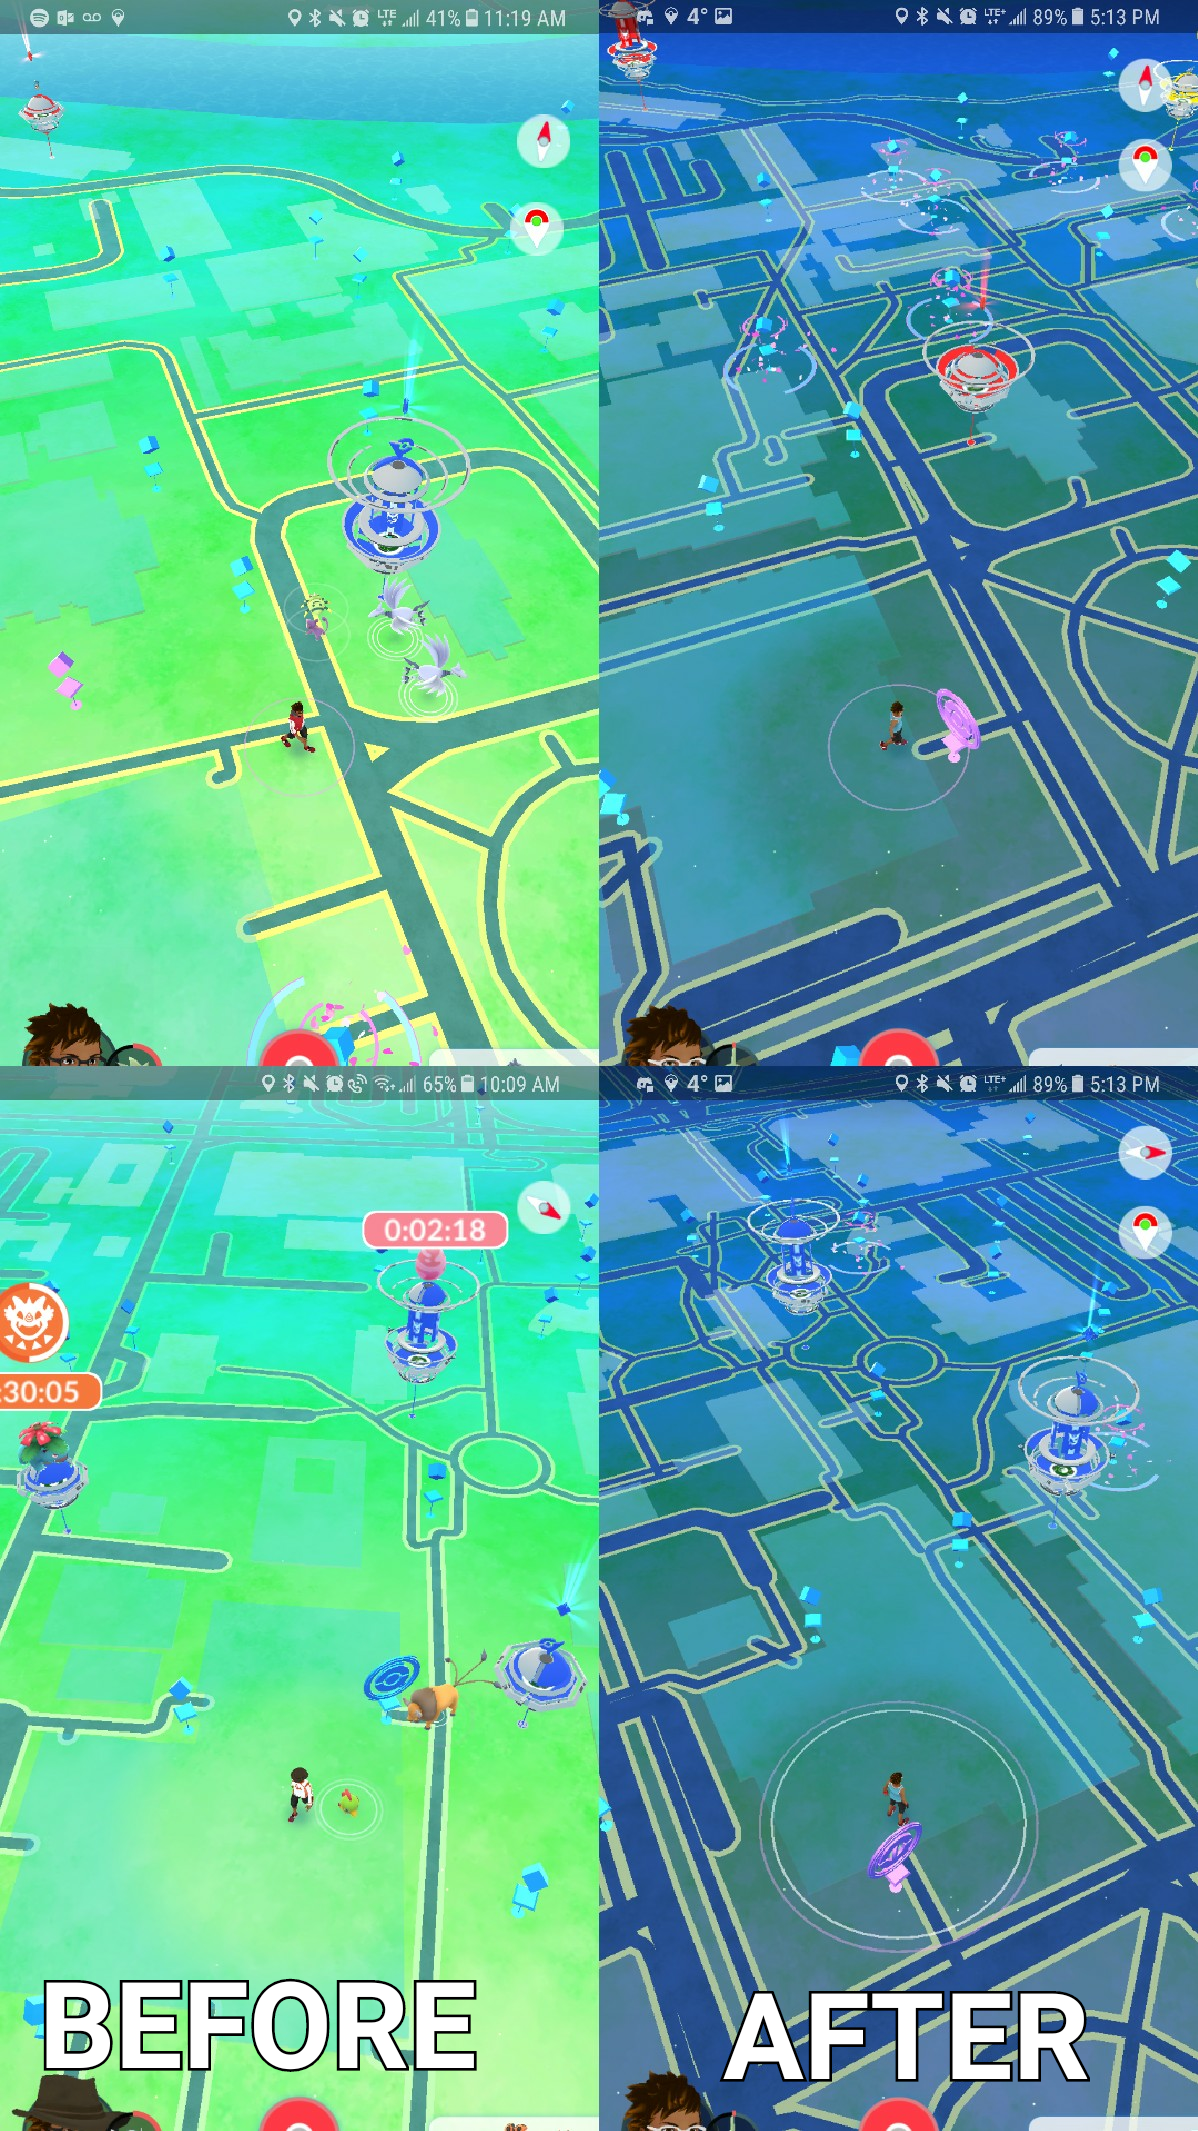 The next Pokemon Go might be made with these new Google Maps tools